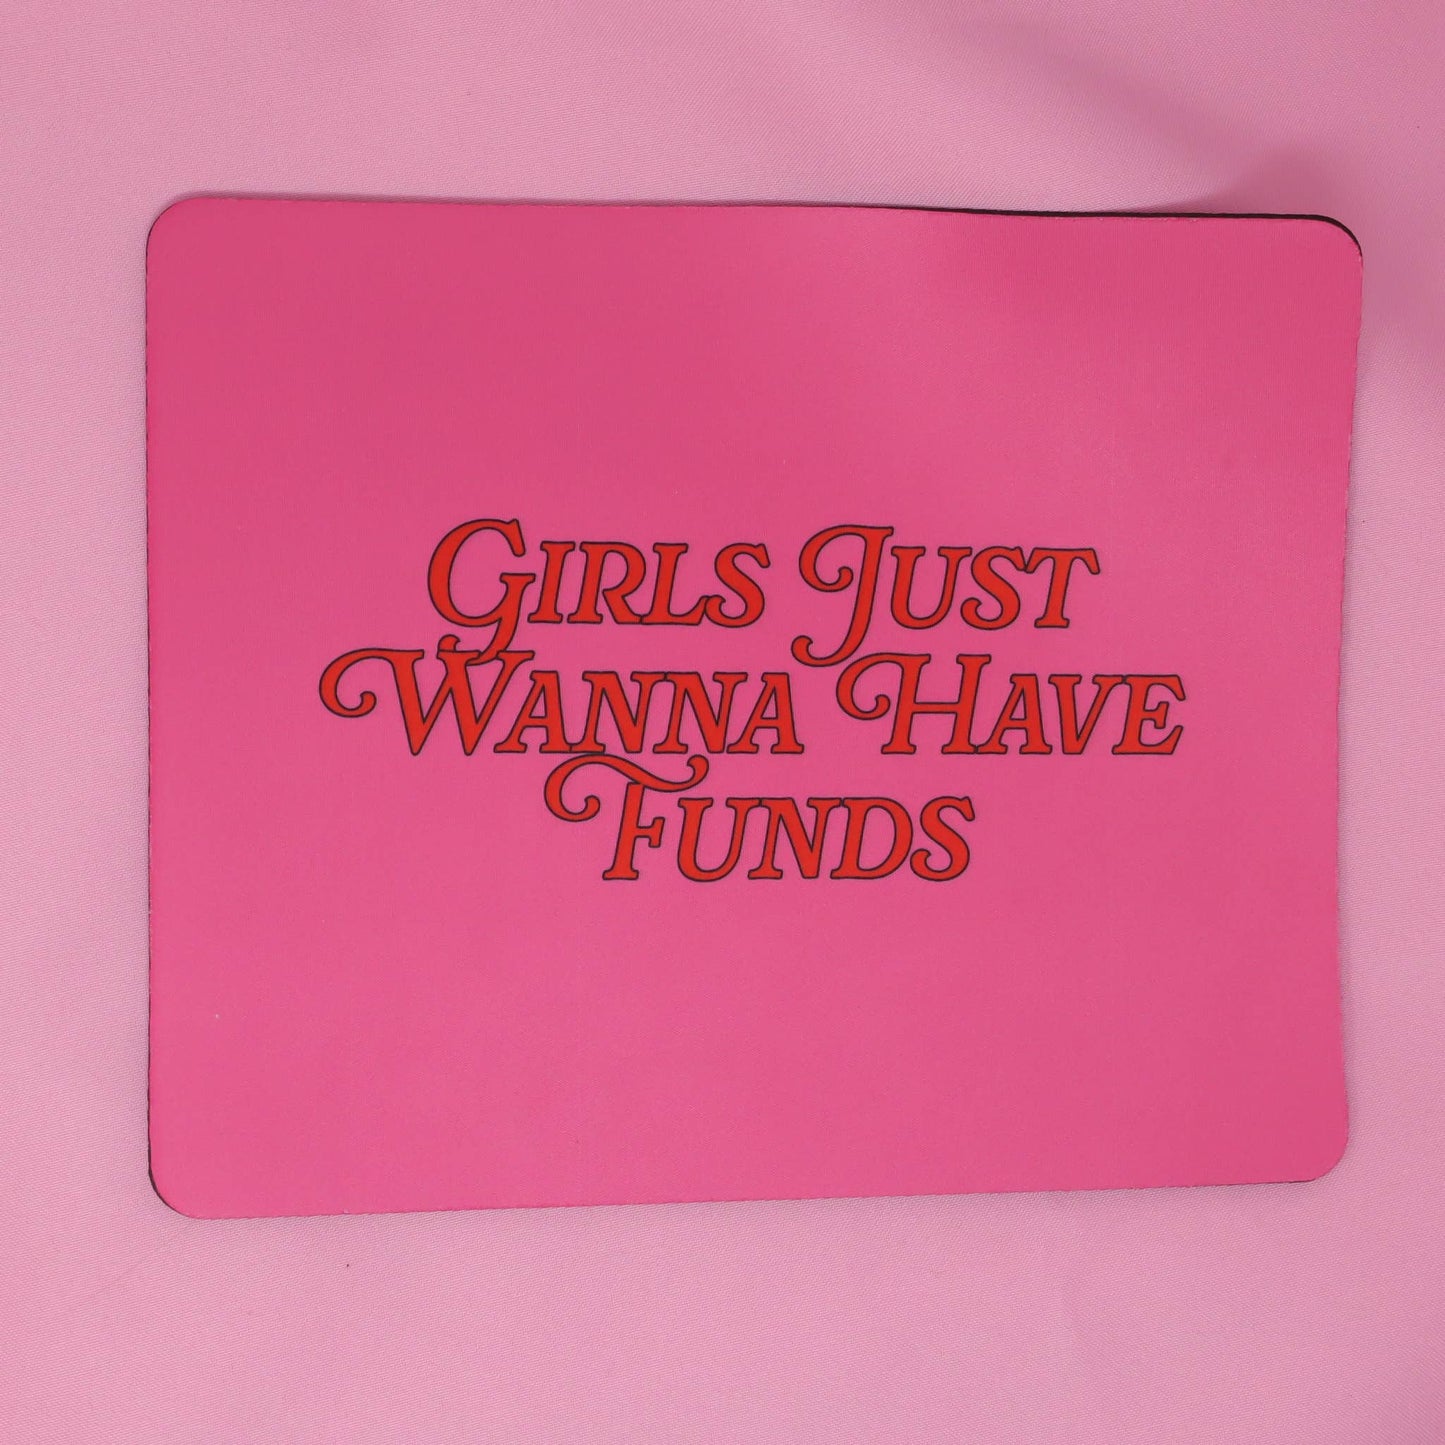 Girls just wanna have funds Mouse Pad